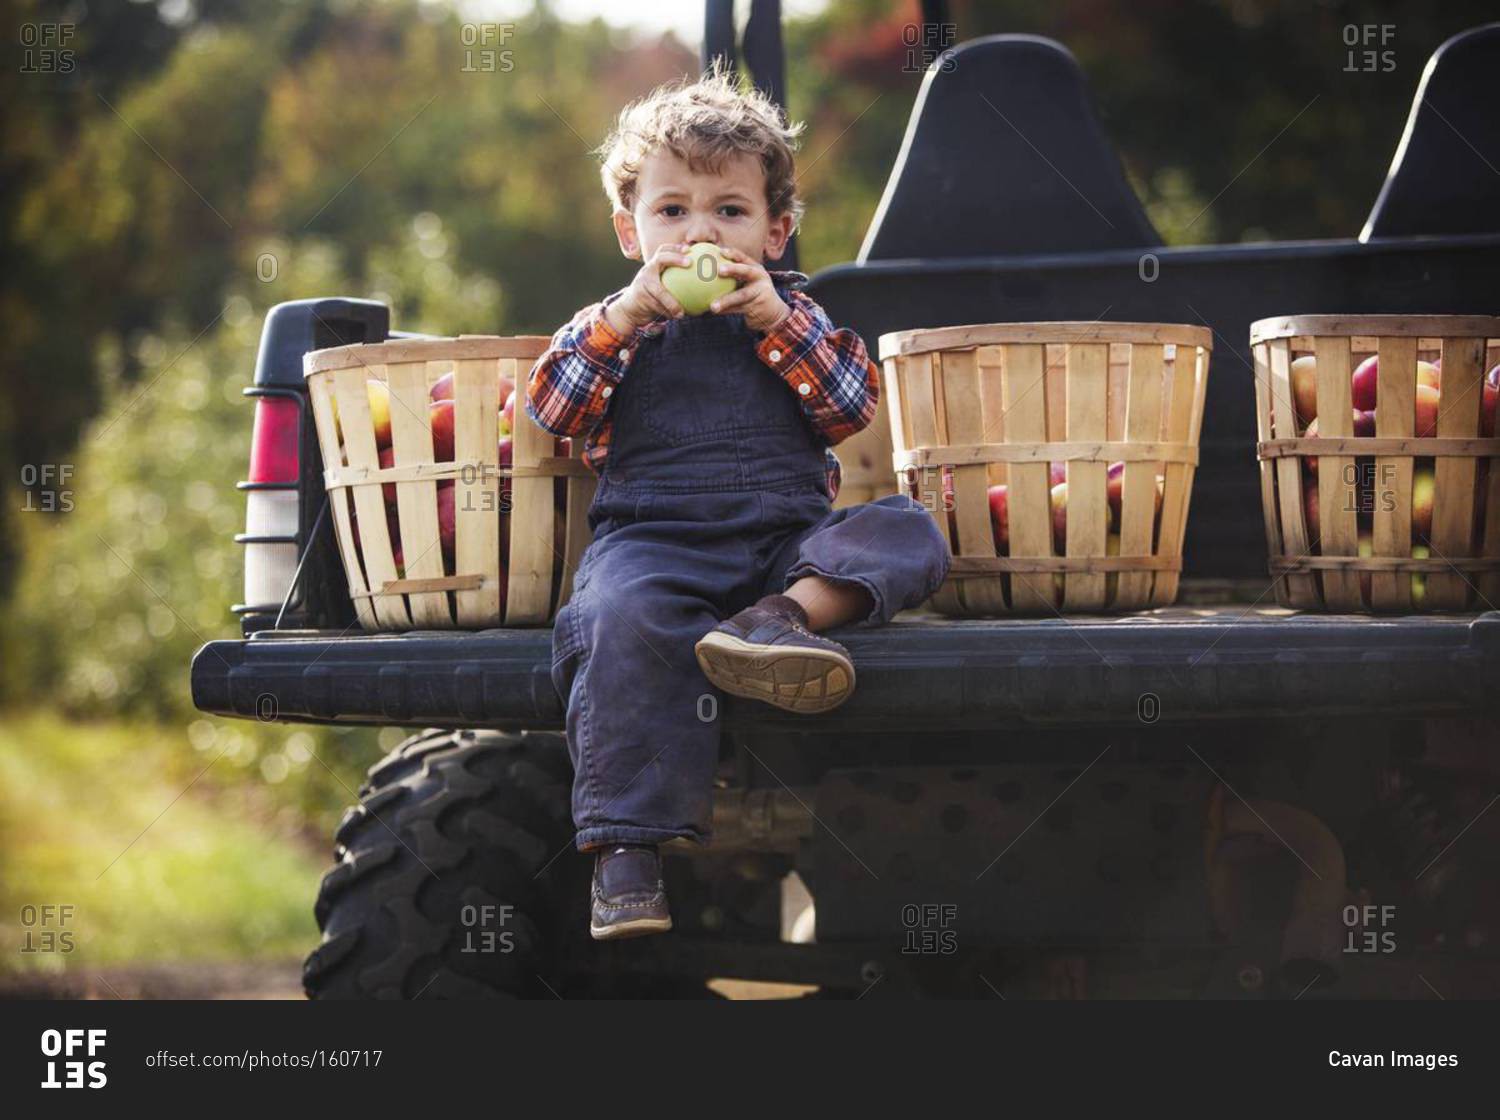 A boy eats an apple in the back of a pickup truck